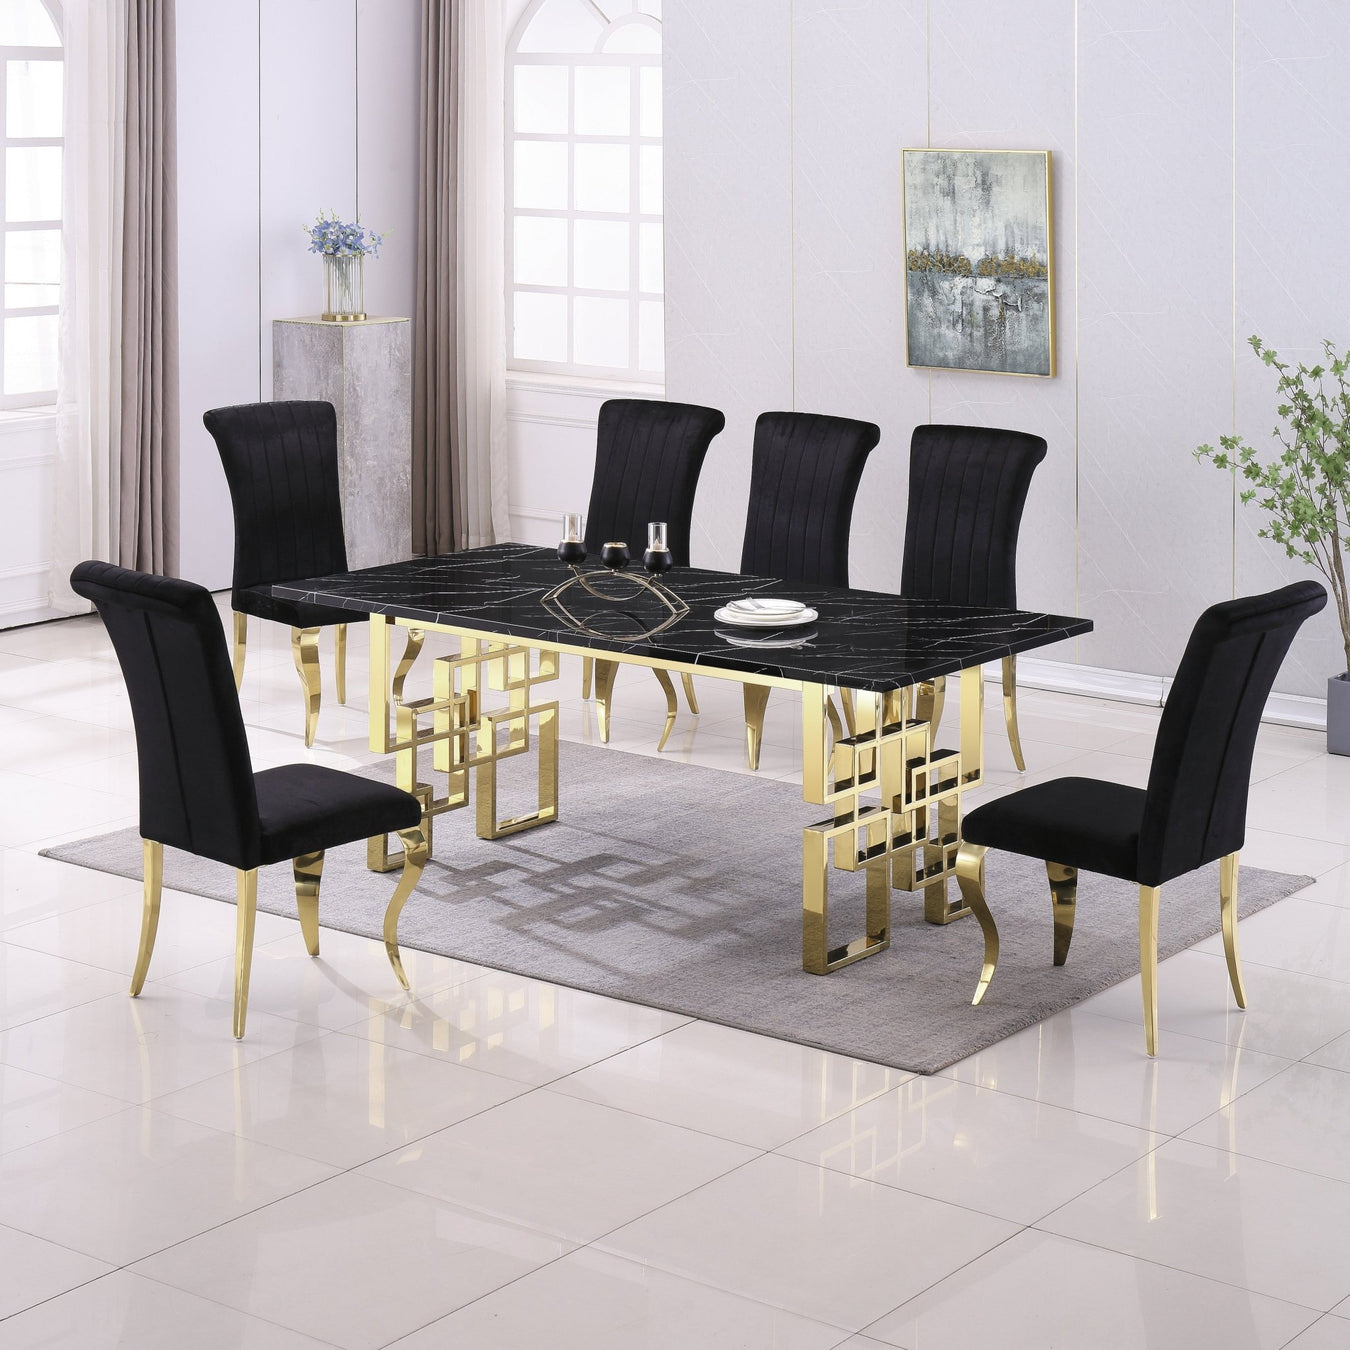 RDT211GMB MARBLE DINING TABLE - ARTISAN FURNITURE